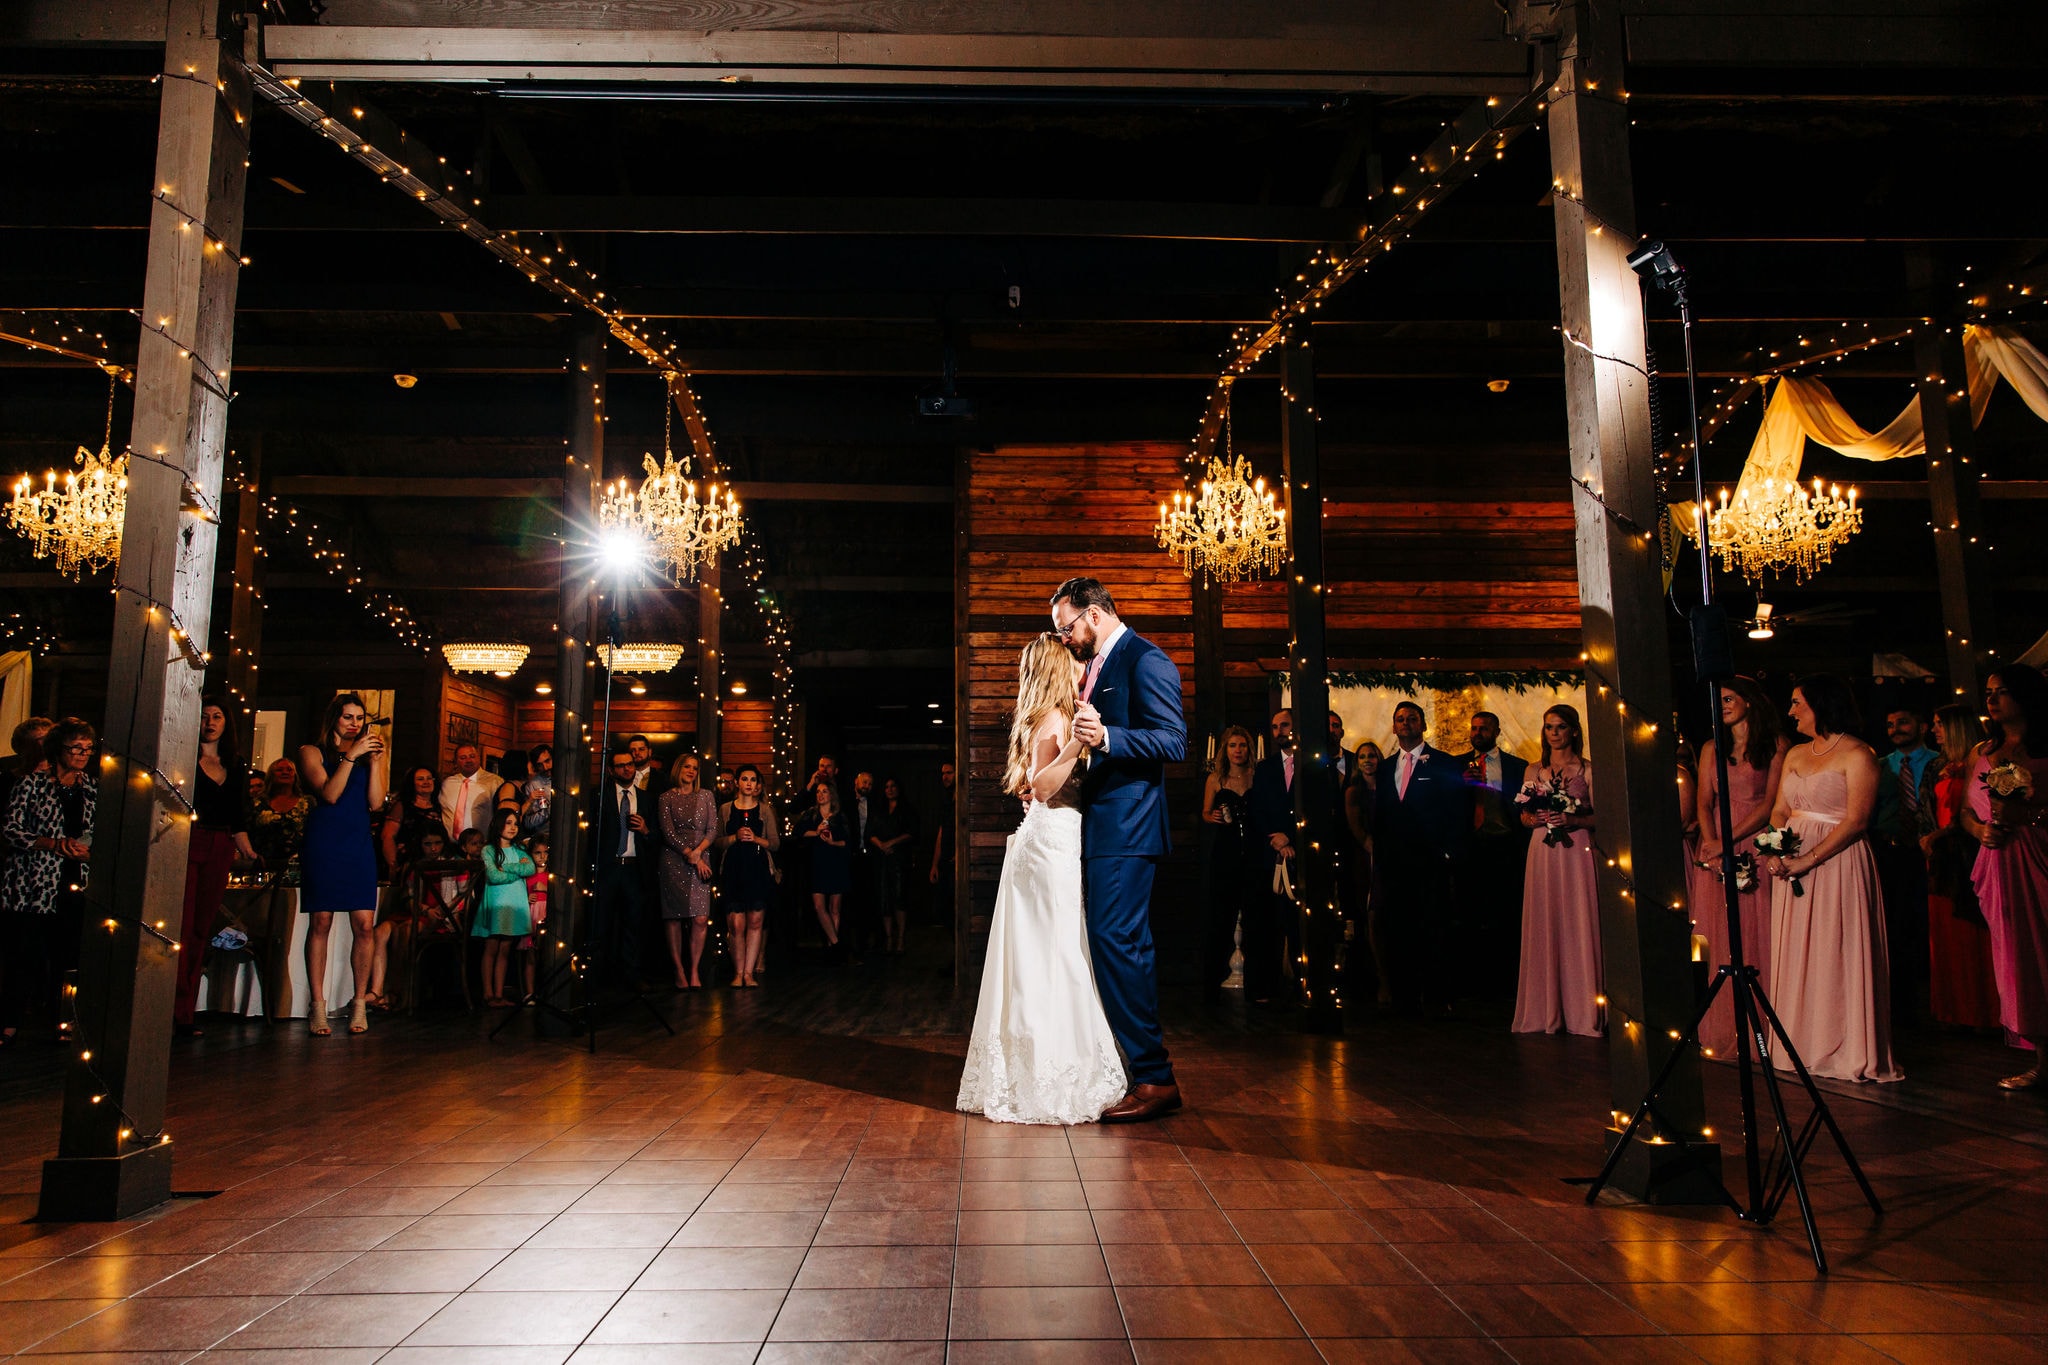 bride in white gown and groom in navy tuxedo sharing their first dance in reception area with wooden interior at ever after farms ranch